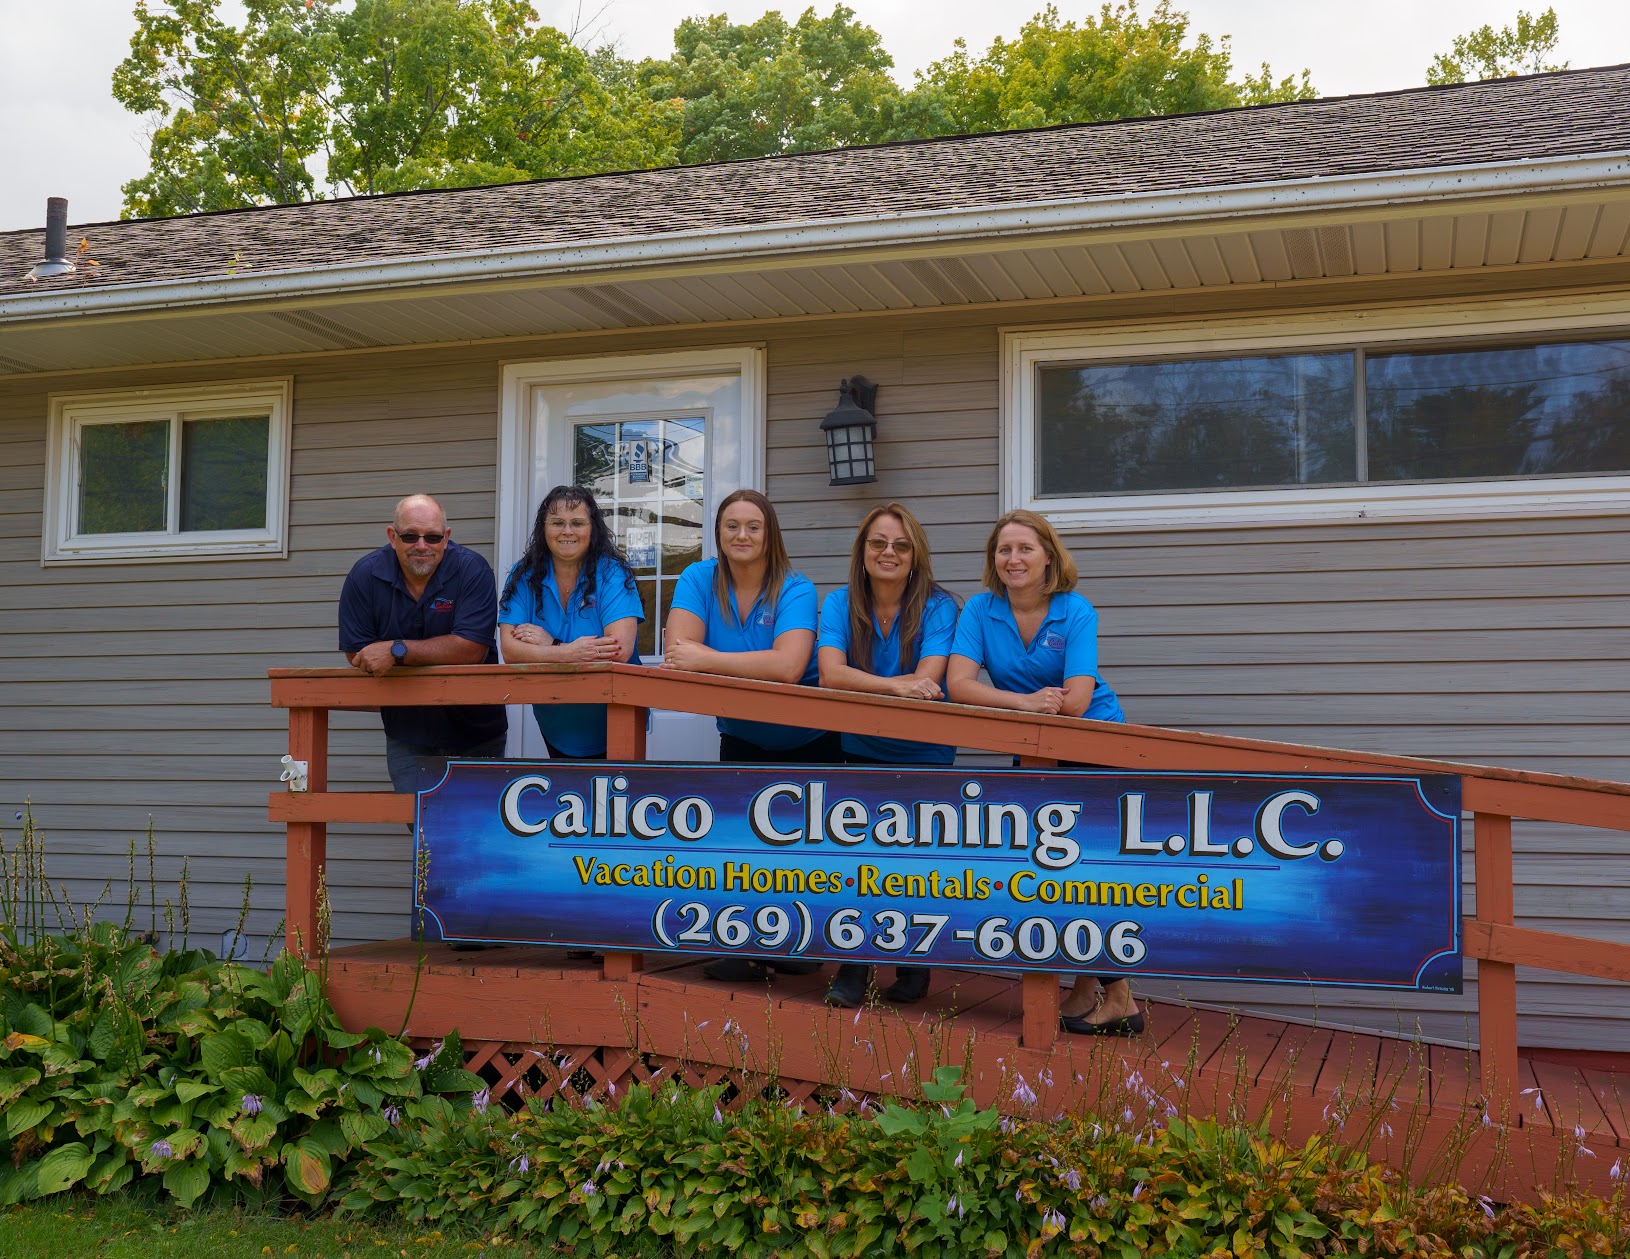 Calico Cleaning LLC 888 Phillips St, South Haven Michigan 49090